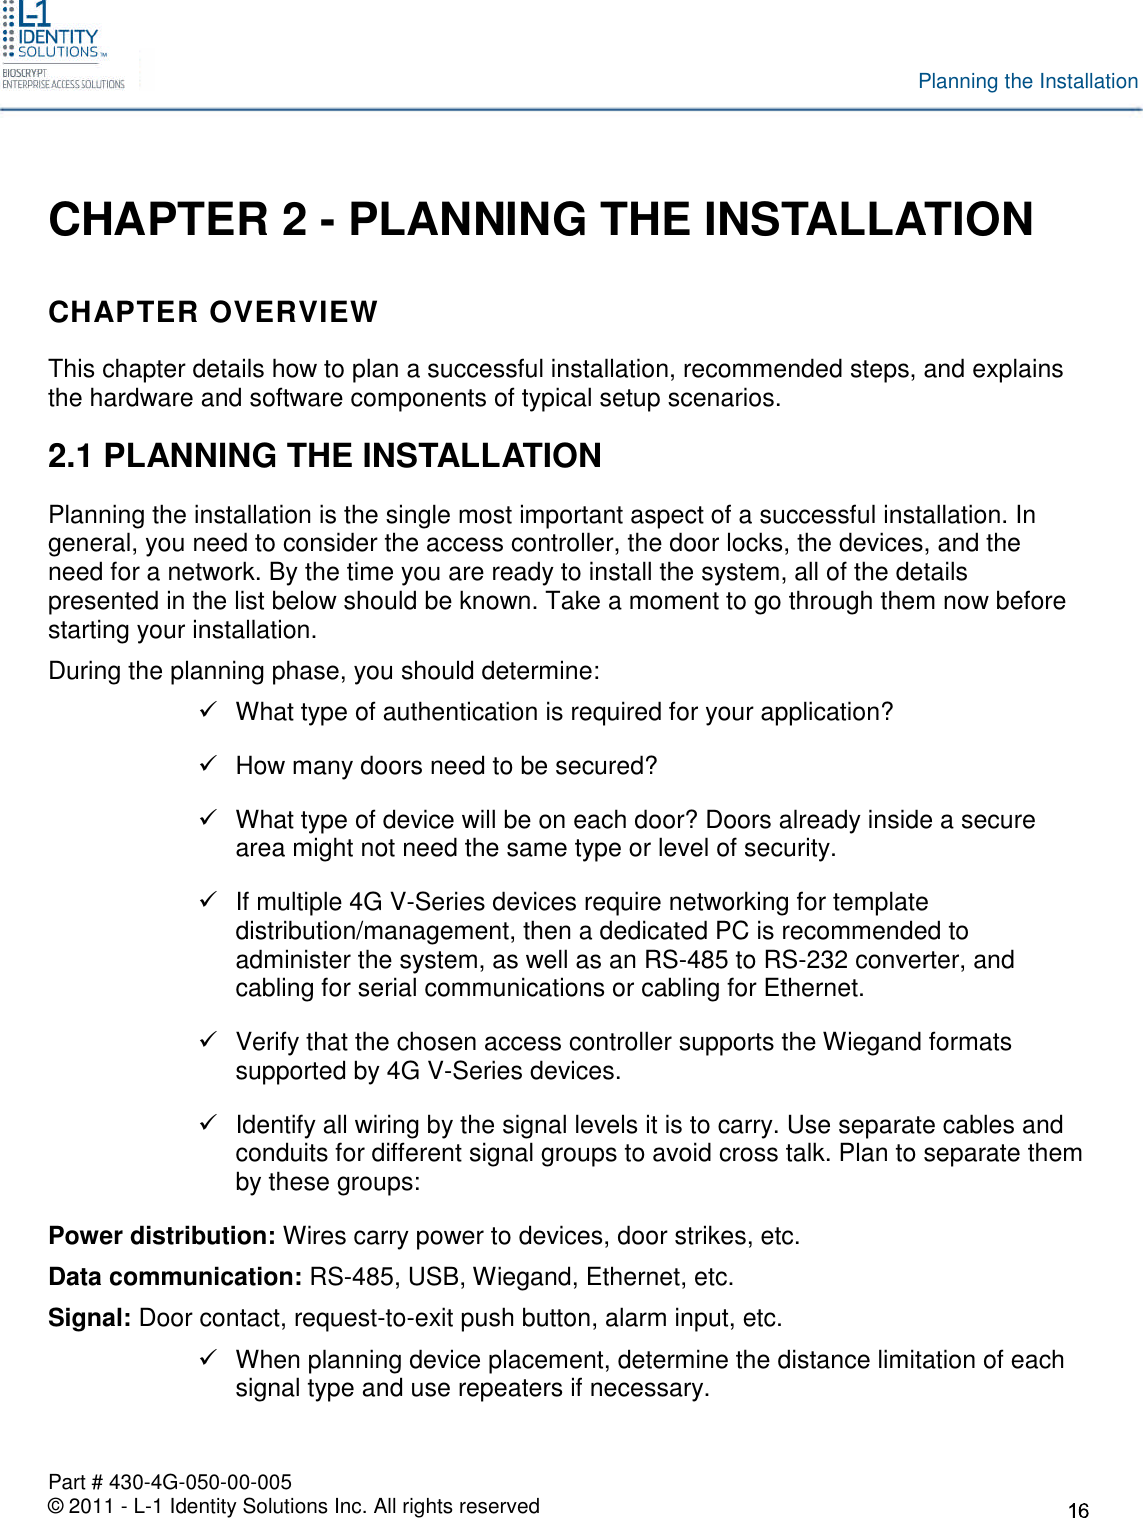 Part # 430-4G-050-00-005© 2011 - L-1 Identity Solutions Inc. All rights reservedPlanning the InstallationCHAPTER 2 - PLANNING THE INSTALLATIONCHAPTER OVERVIEWThis chapter details how to plan a successful installation, recommended steps, and explainsthe hardware and software components of typical setup scenarios.2.1 PLANNING THE INSTALLATIONPlanning the installation is the single most important aspect of a successful installation. Ingeneral, you need to consider the access controller, the door locks, the devices, and theneed for a network. By the time you are ready to install the system, all of the detailspresented in the list below should be known. Take a moment to go through them now beforestarting your installation.During the planning phase, you should determine:What type of authentication is required for your application?How many doors need to be secured?What type of device will be on each door? Doors already inside a securearea might not need the same type or level of security.If multiple 4G V-Series devices require networking for templatedistribution/management, then a dedicated PC is recommended toadminister the system, as well as an RS-485 to RS-232 converter, andcabling for serial communications or cabling for Ethernet.Verify that the chosen access controller supports the Wiegand formatssupported by 4G V-Series devices.Identify all wiring by the signal levels it is to carry. Use separate cables andconduits for different signal groups to avoid cross talk. Plan to separate themby these groups:Power distribution: Wires carry power to devices, door strikes, etc.Data communication: RS-485, USB, Wiegand, Ethernet, etc.Signal: Door contact, request-to-exit push button, alarm input, etc.When planning device placement, determine the distance limitation of eachsignal type and use repeaters if necessary.